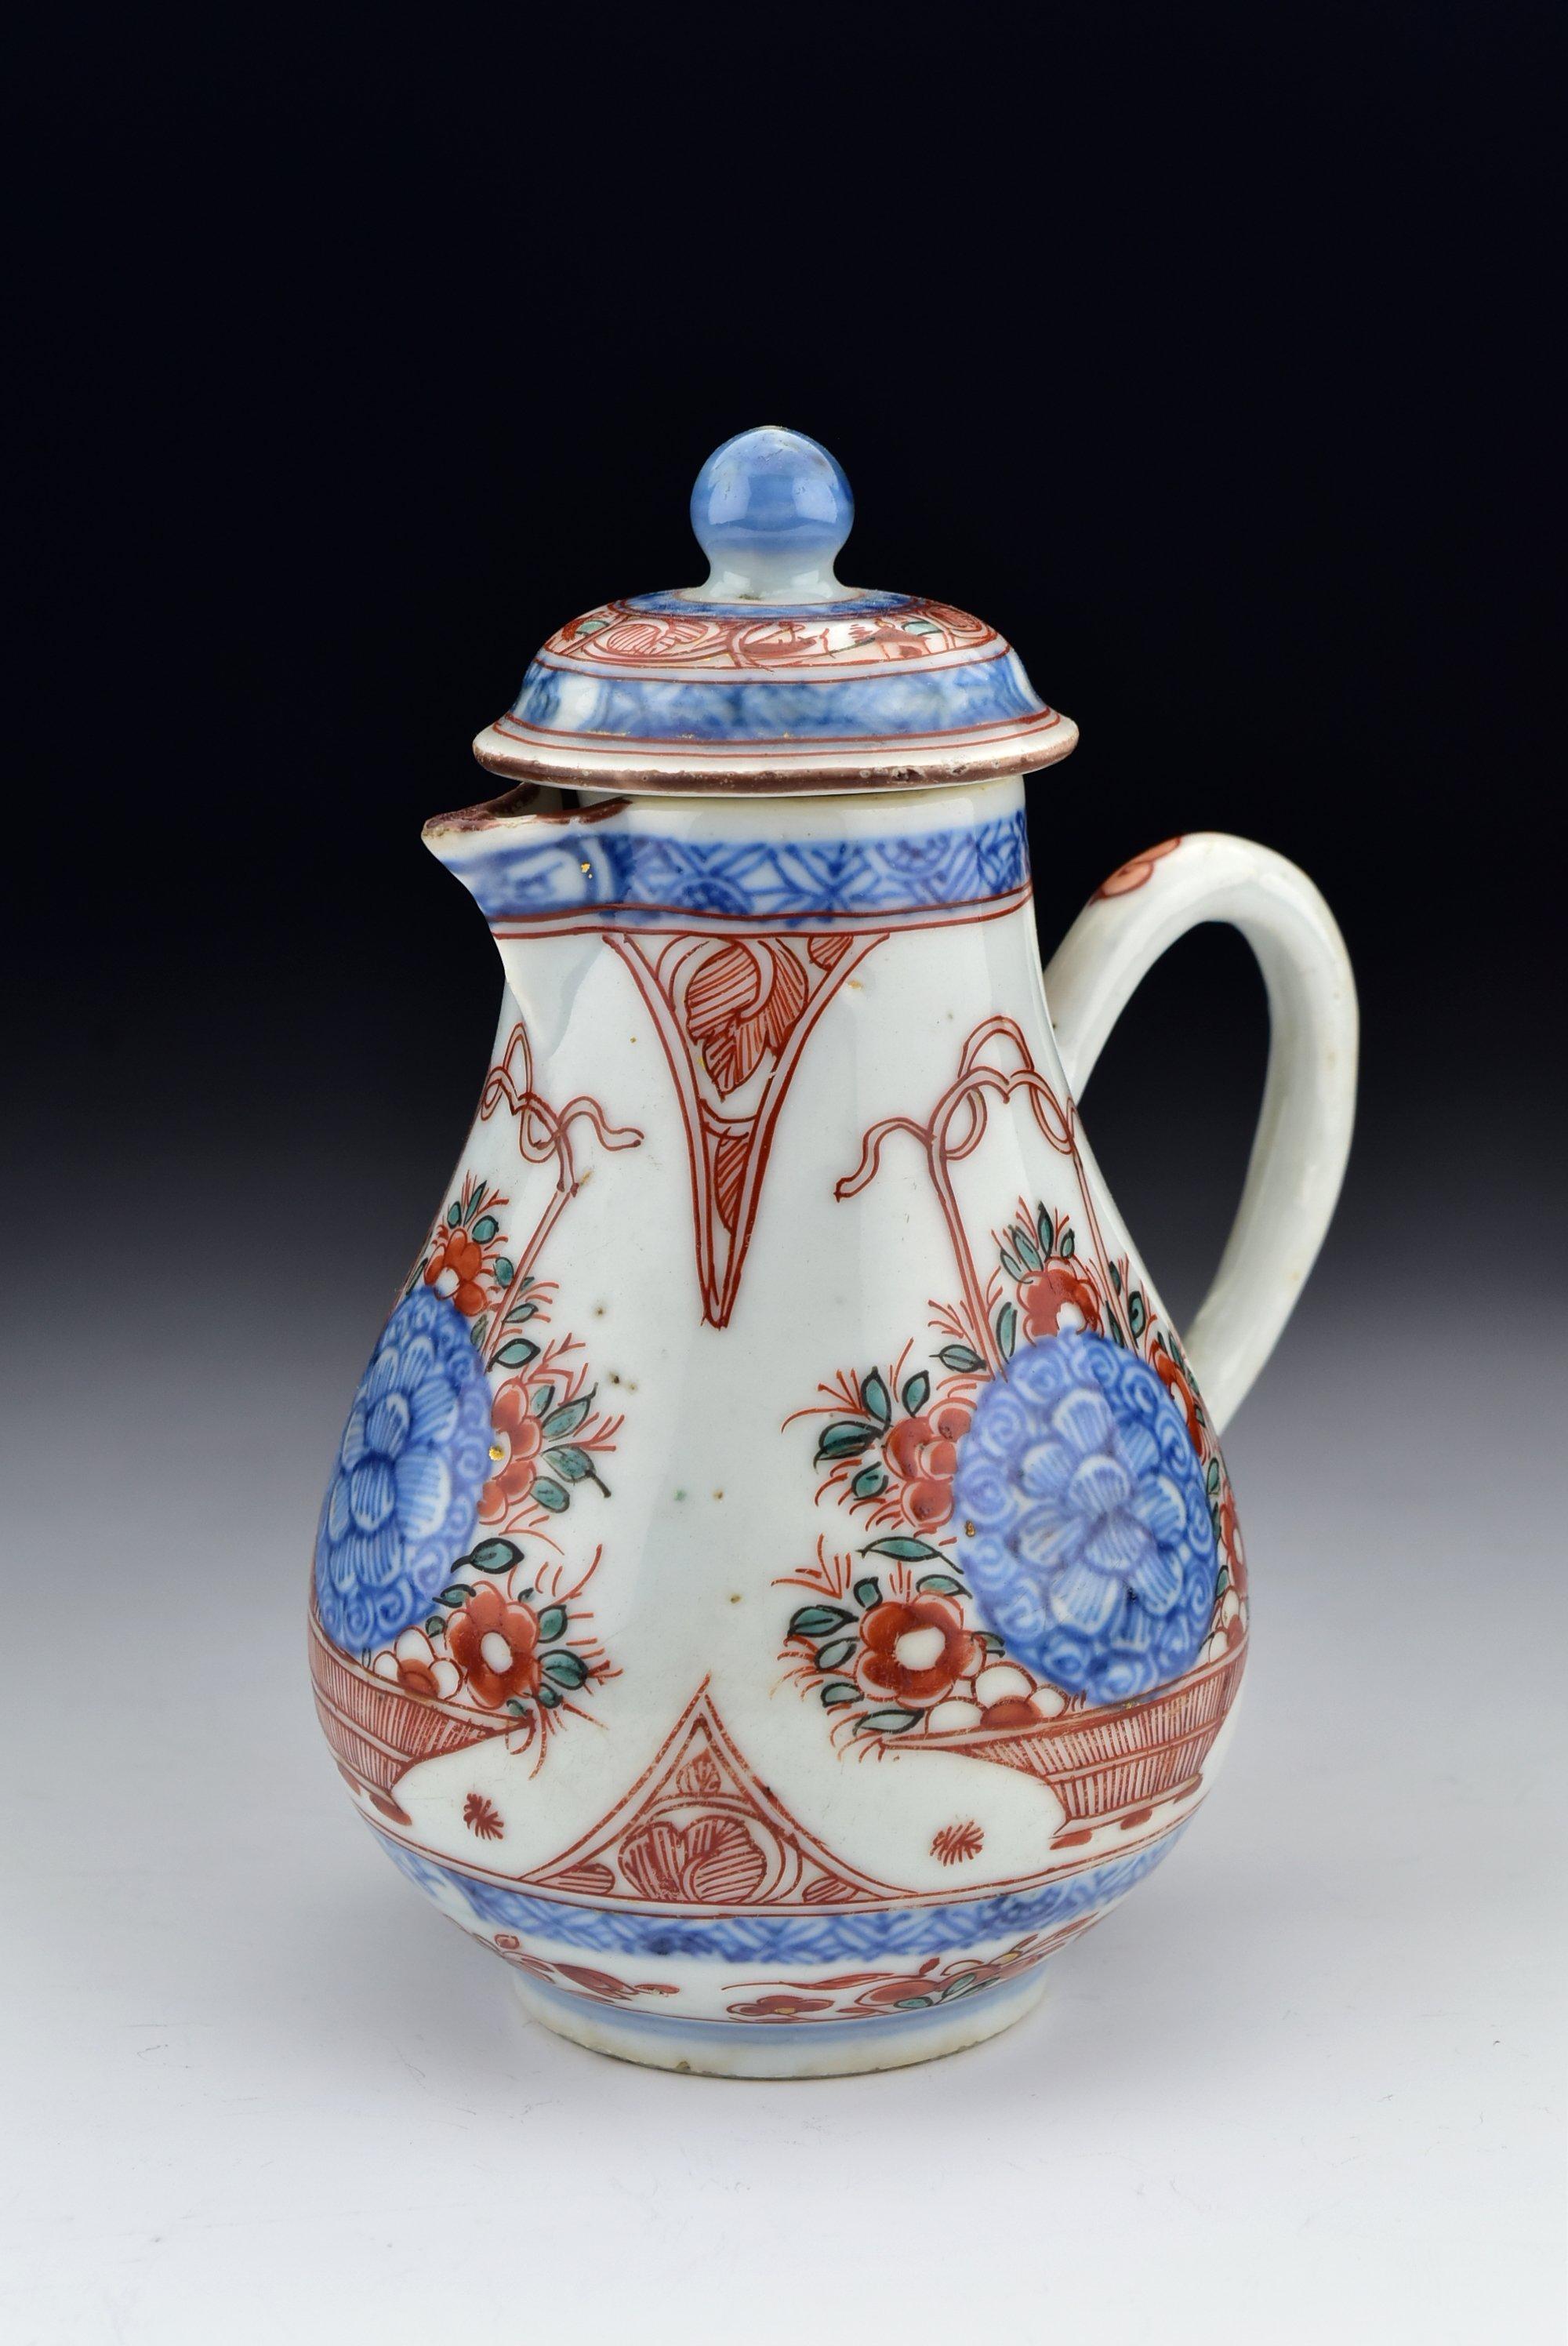 Description: Chinese export porcelain covered cream jug decorated in underglaze and above glaze designs including flowers and small views.

Age: circa 1735-1740

Size: Approximately 5 + 1/4 inches in overall height and 3 + 3/4 inches from the